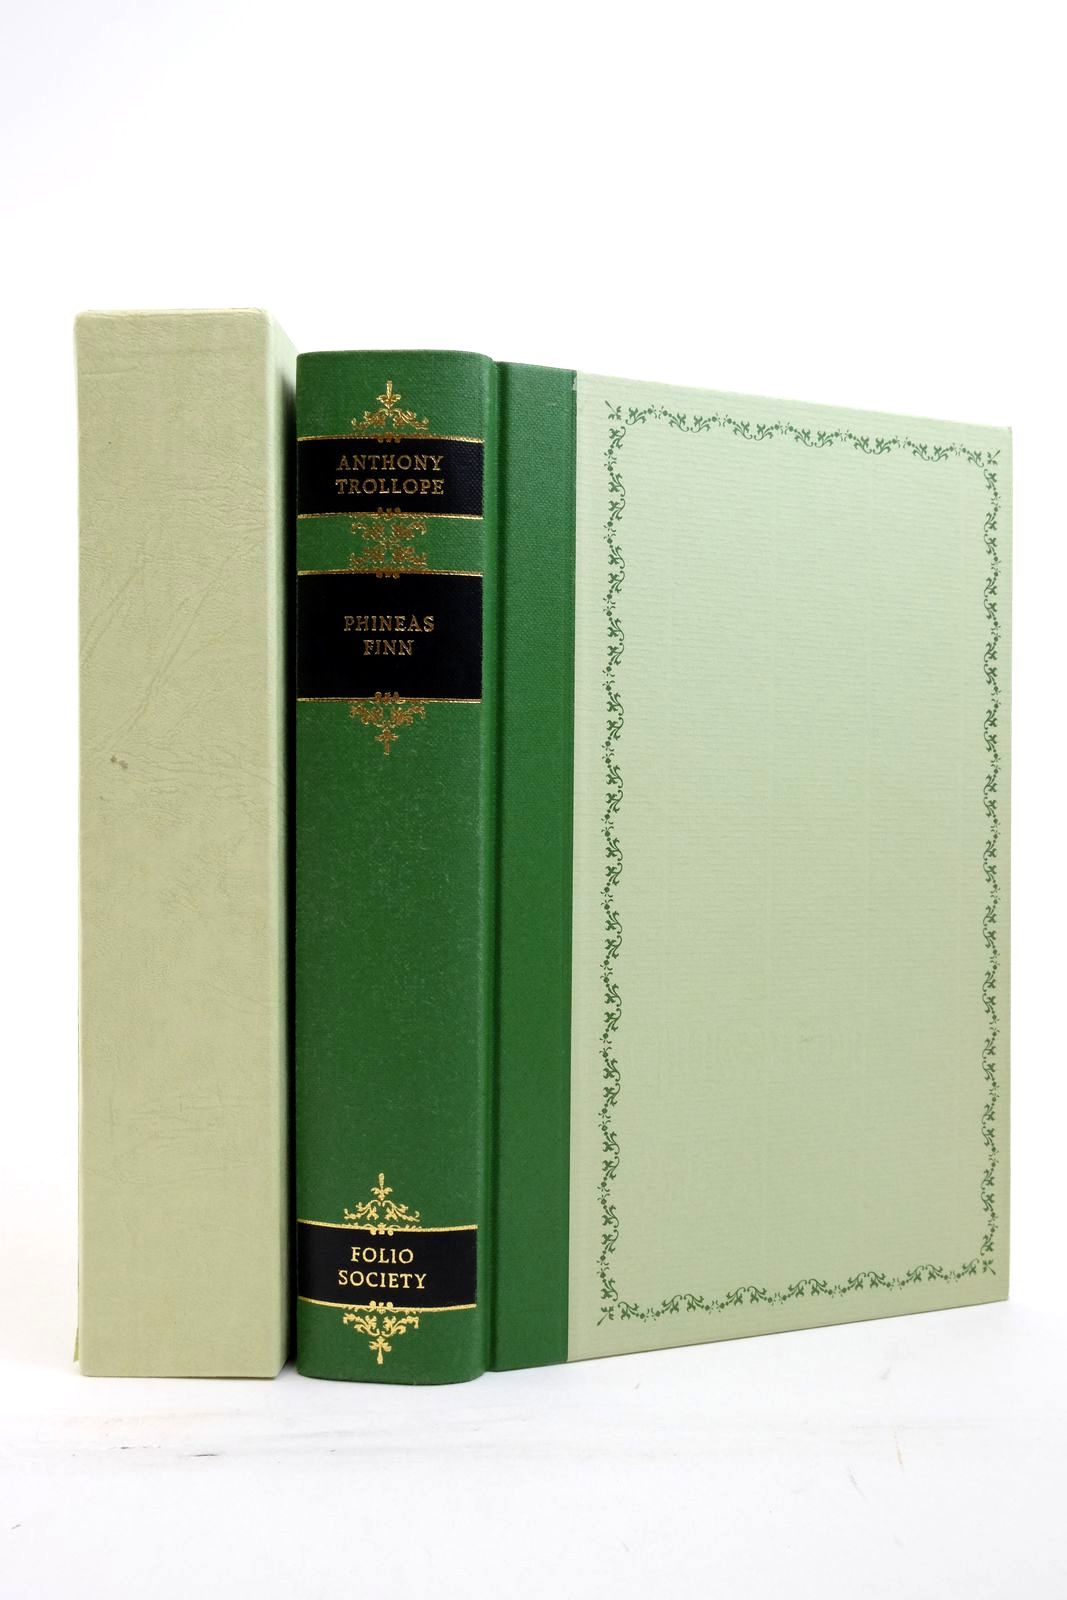 Photo of PHINEAS FINN: THE IRISH MEMBER written by Trollope, Anthony Powell, J. Enoch illustrated by Thomas, Llewellyn published by Folio Society (STOCK CODE: 2137210)  for sale by Stella & Rose's Books